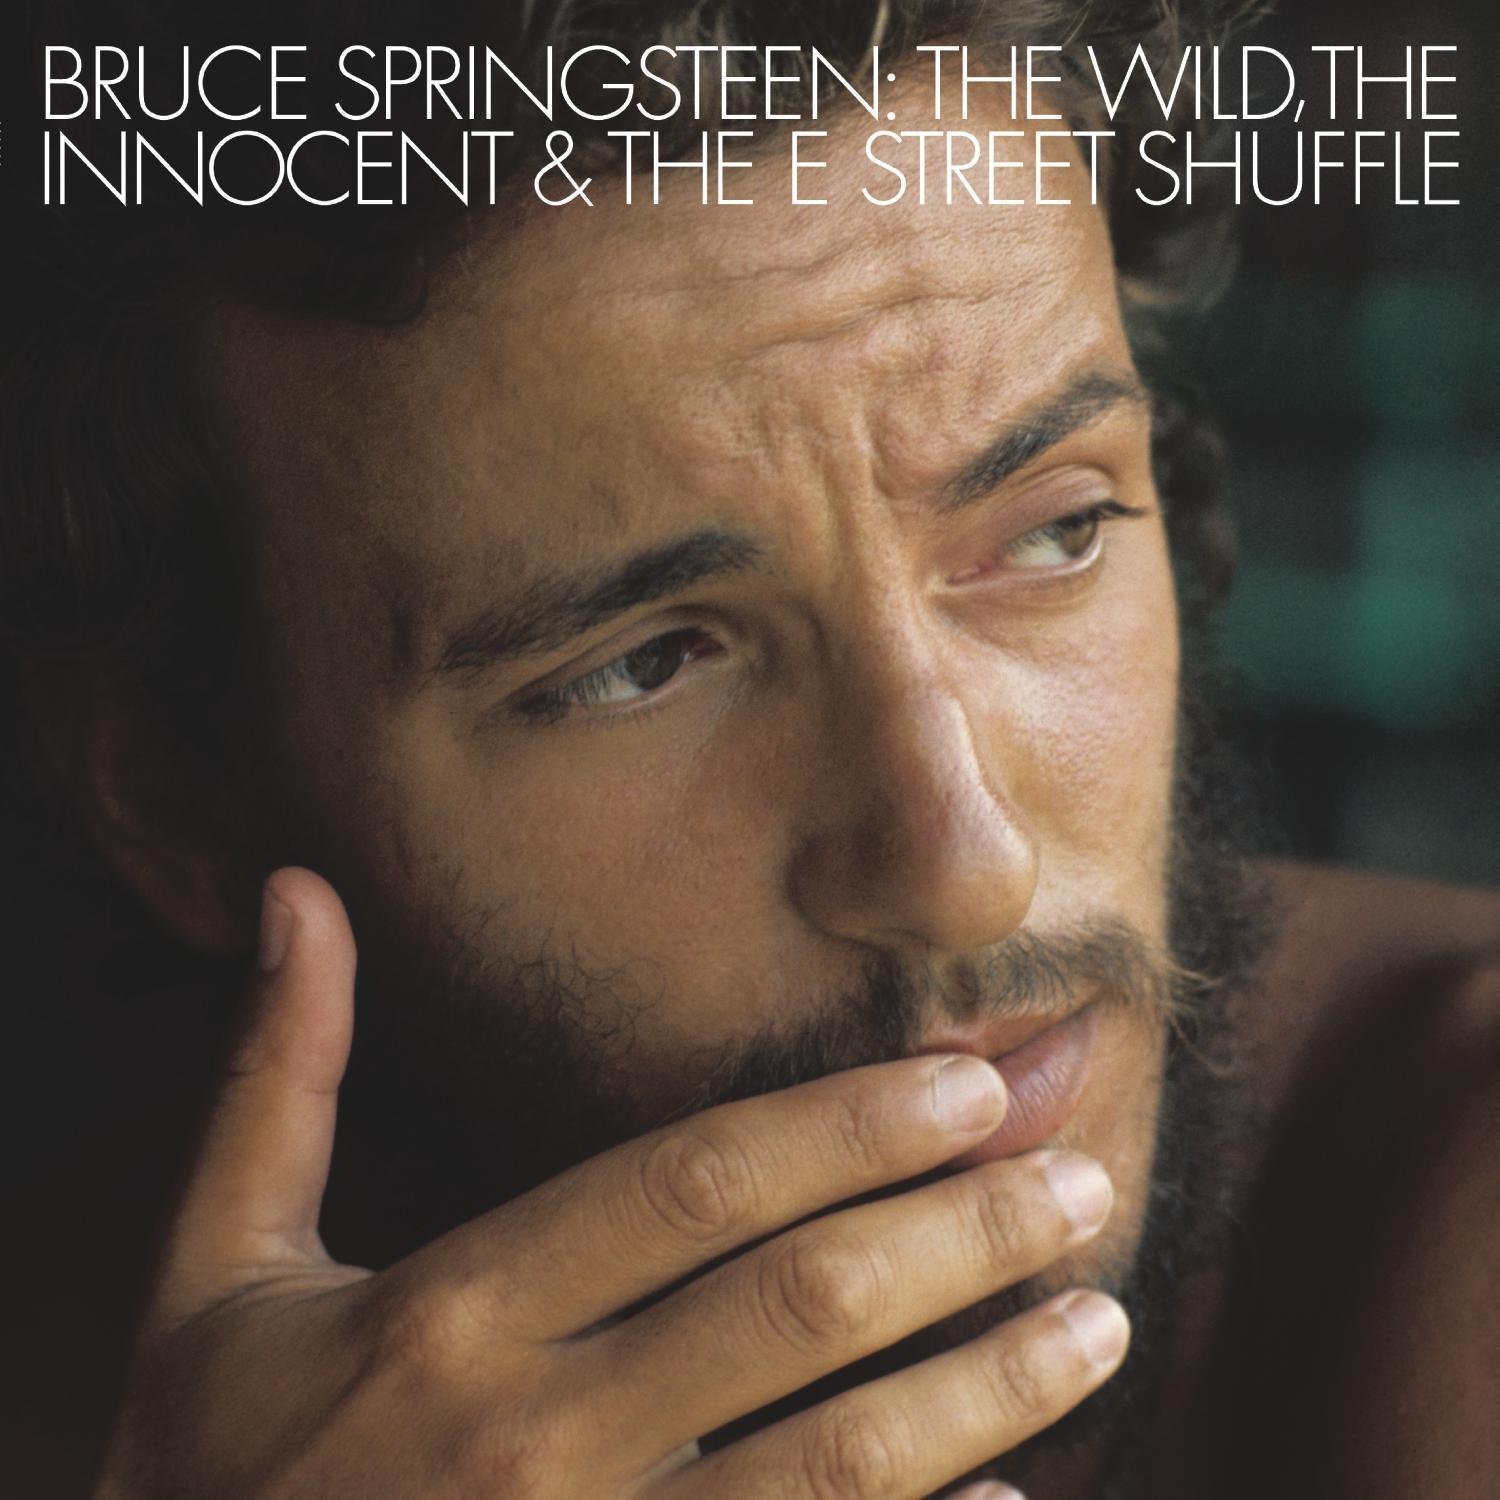 Vinyl Record Bruce Springsteen Wild, the Innocent and the E Street Shuffle (LP)